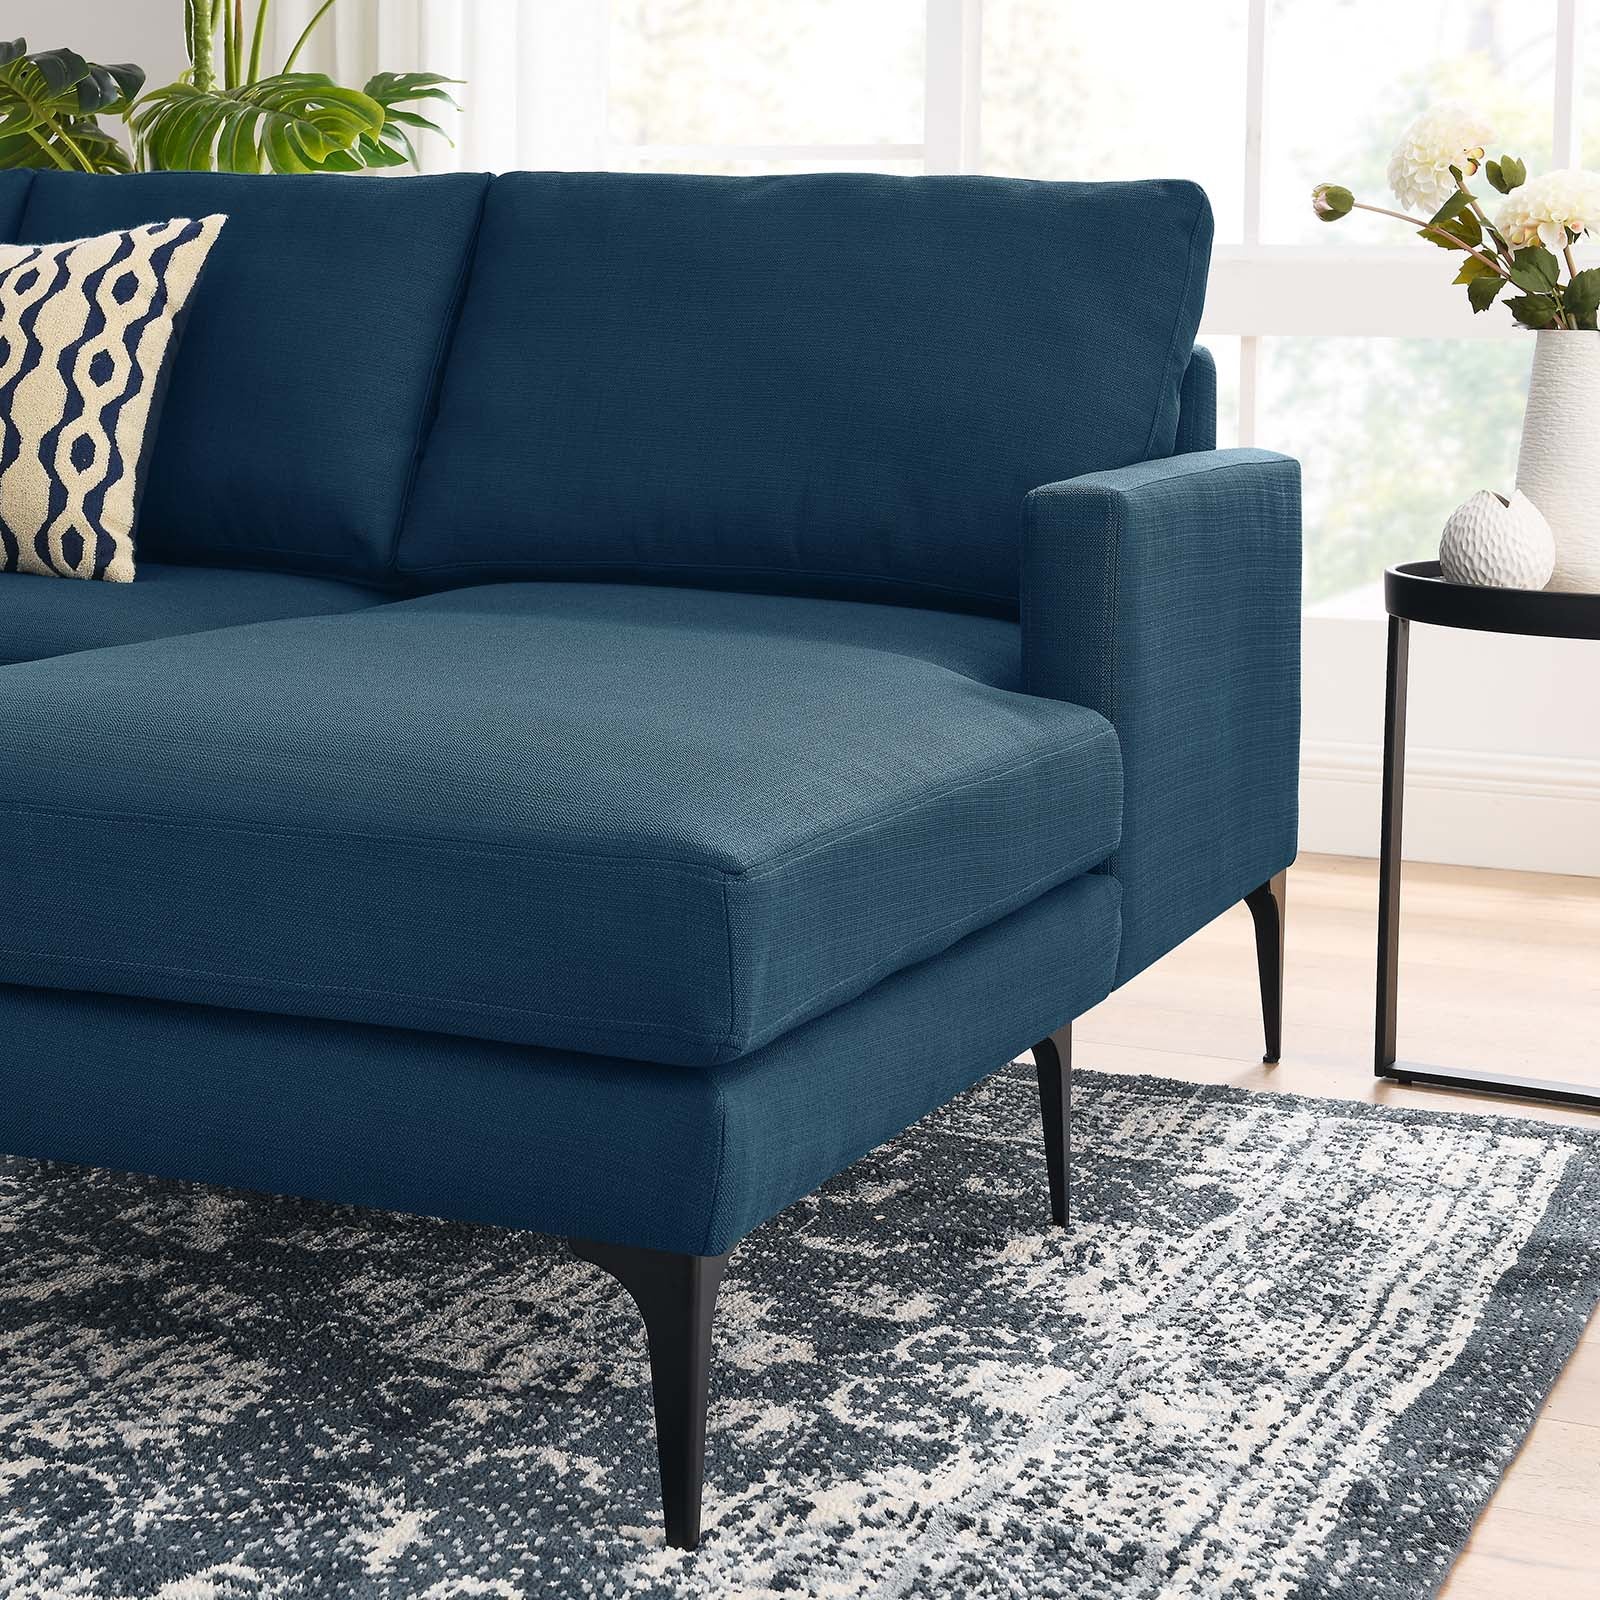 Evermore Right-Facing Upholstered Fabric Sectional Sofa - East Shore Modern Home Furnishings